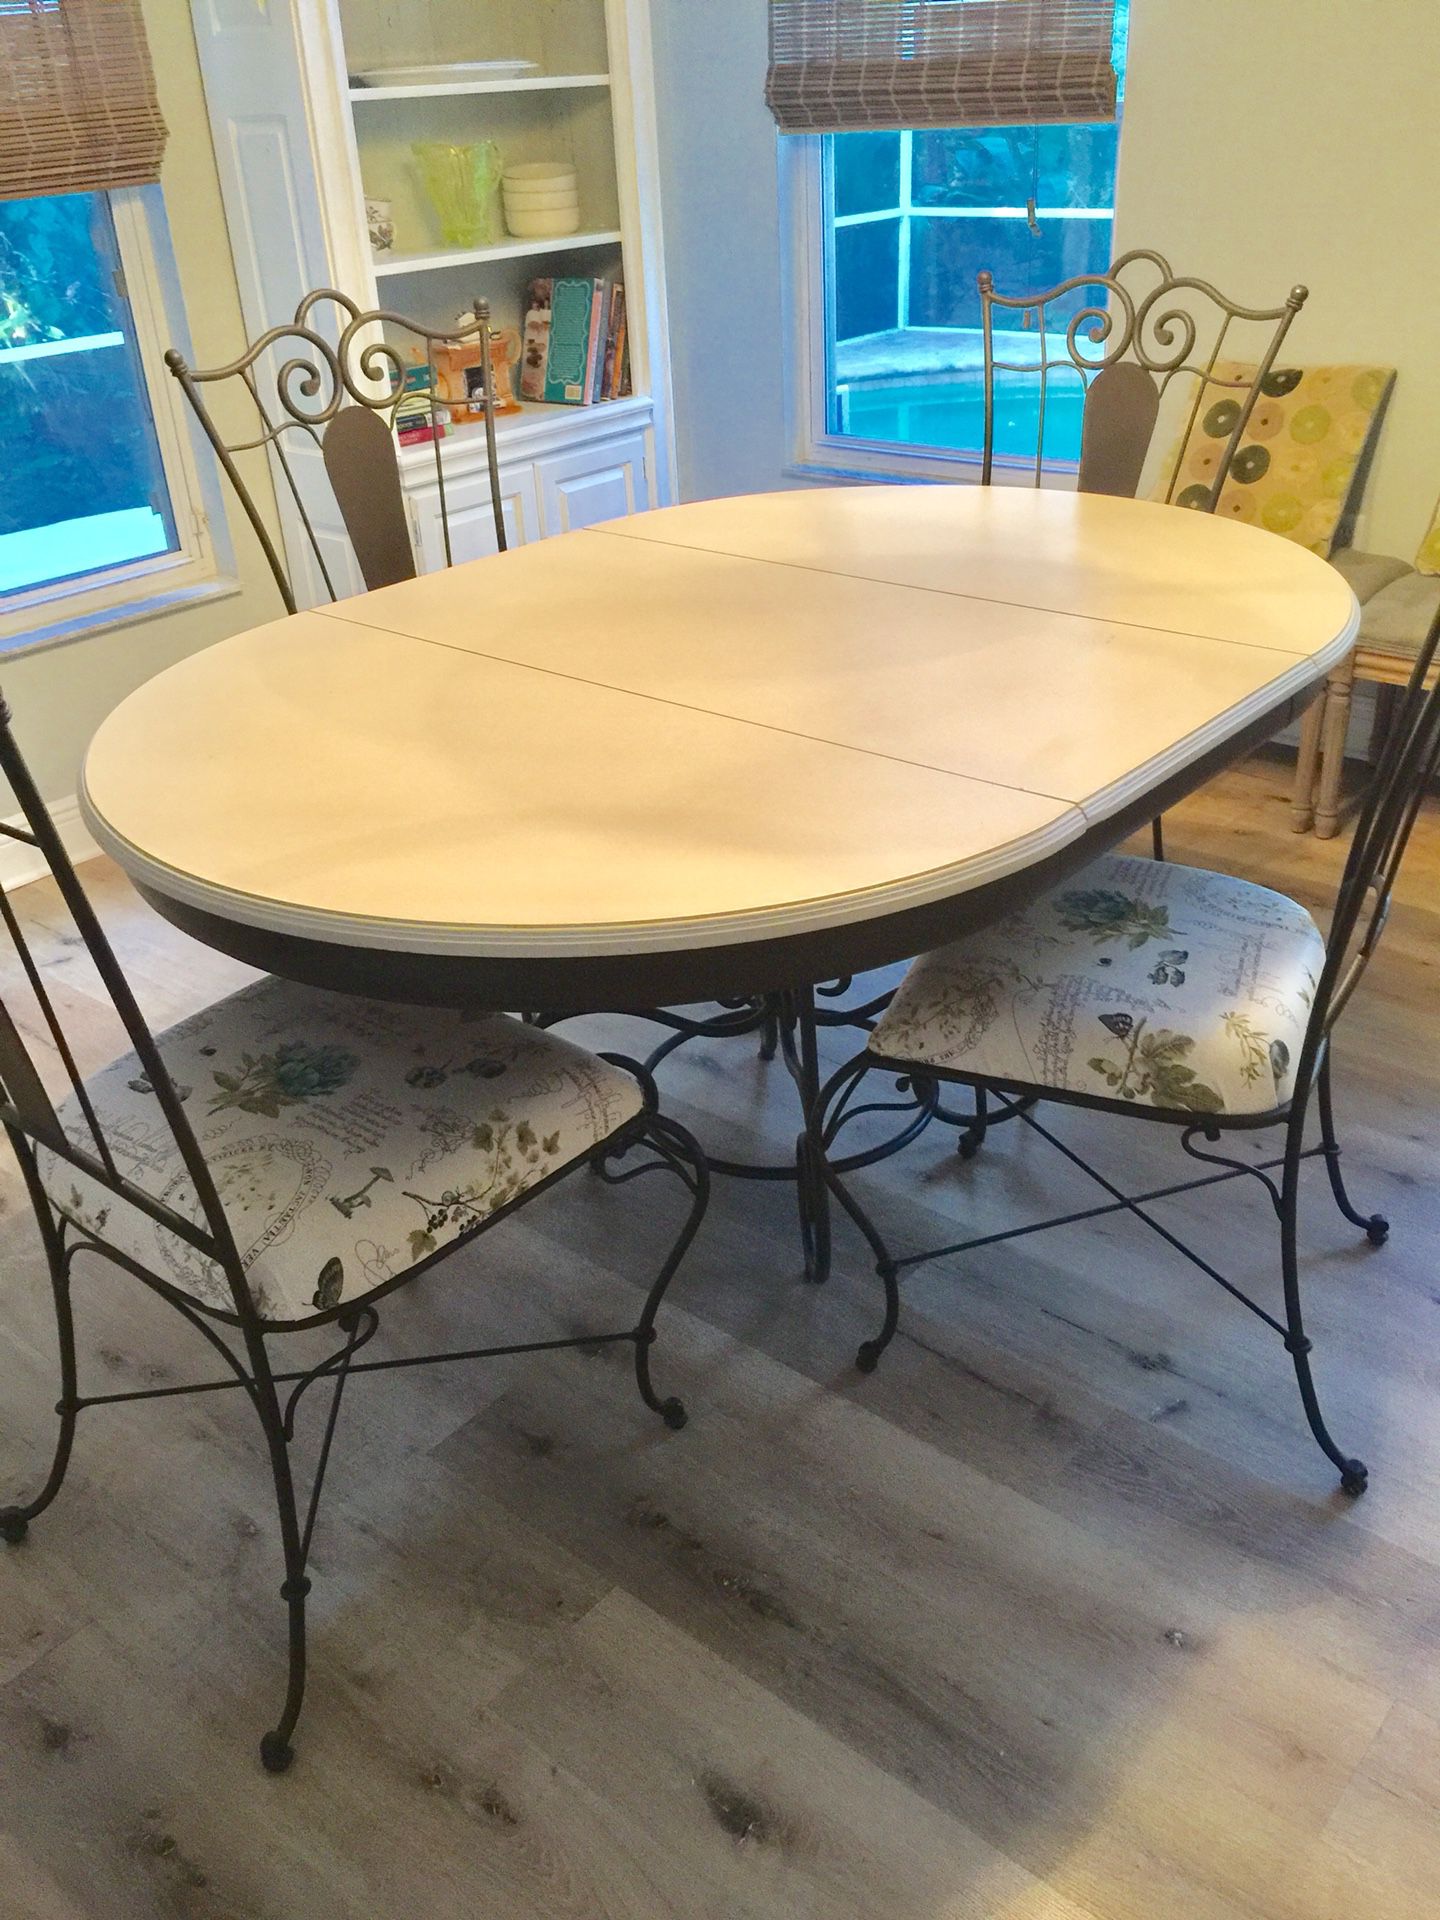 Must go NOW! LIKE NEW Oak and Iron Dining Table 6 chairs